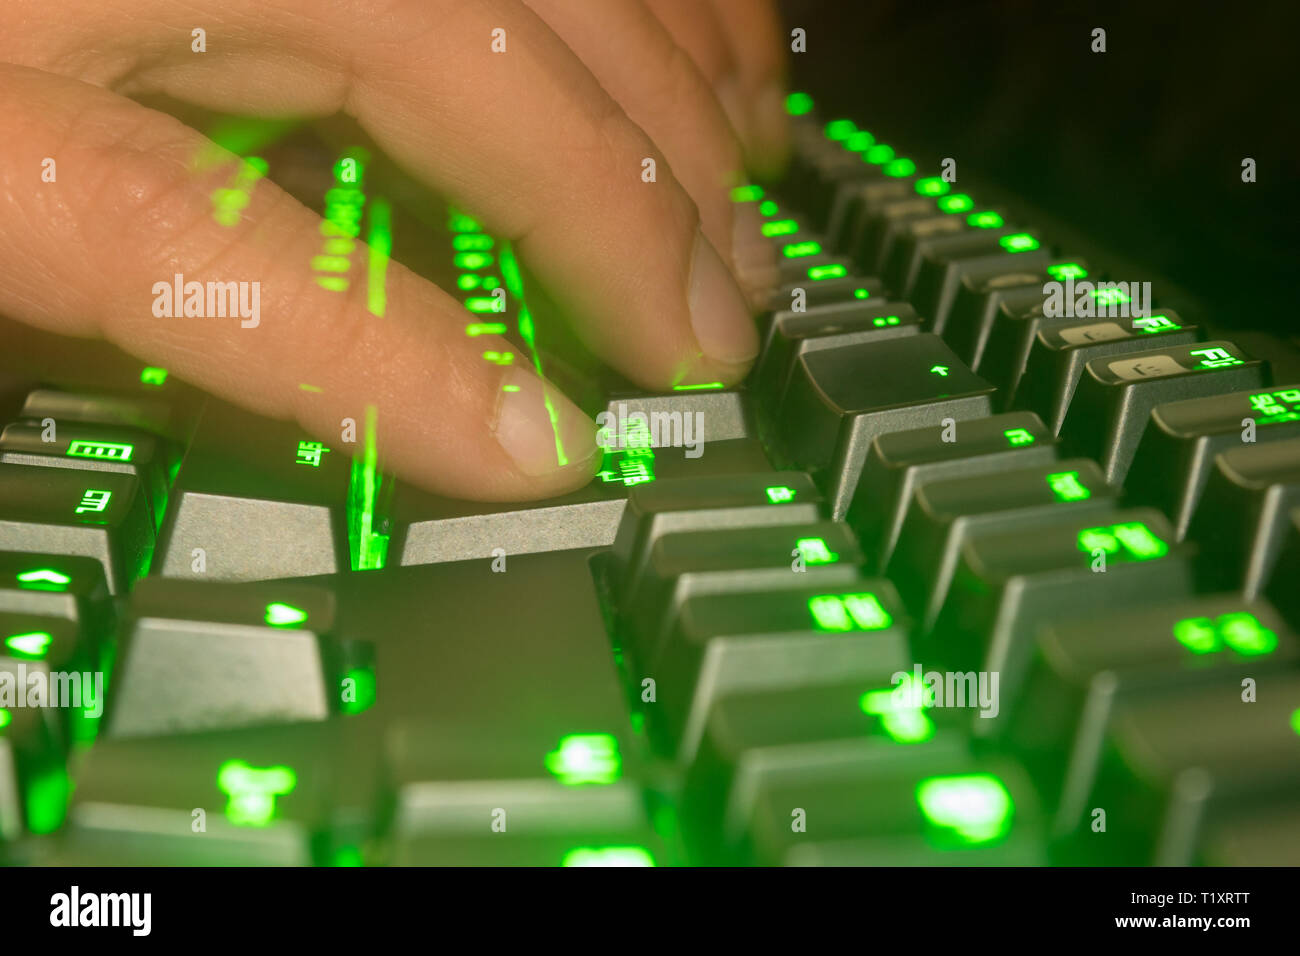 Typing fast on a green keyboard. Concept of hacking. Slow shutter speed. Stock Photo